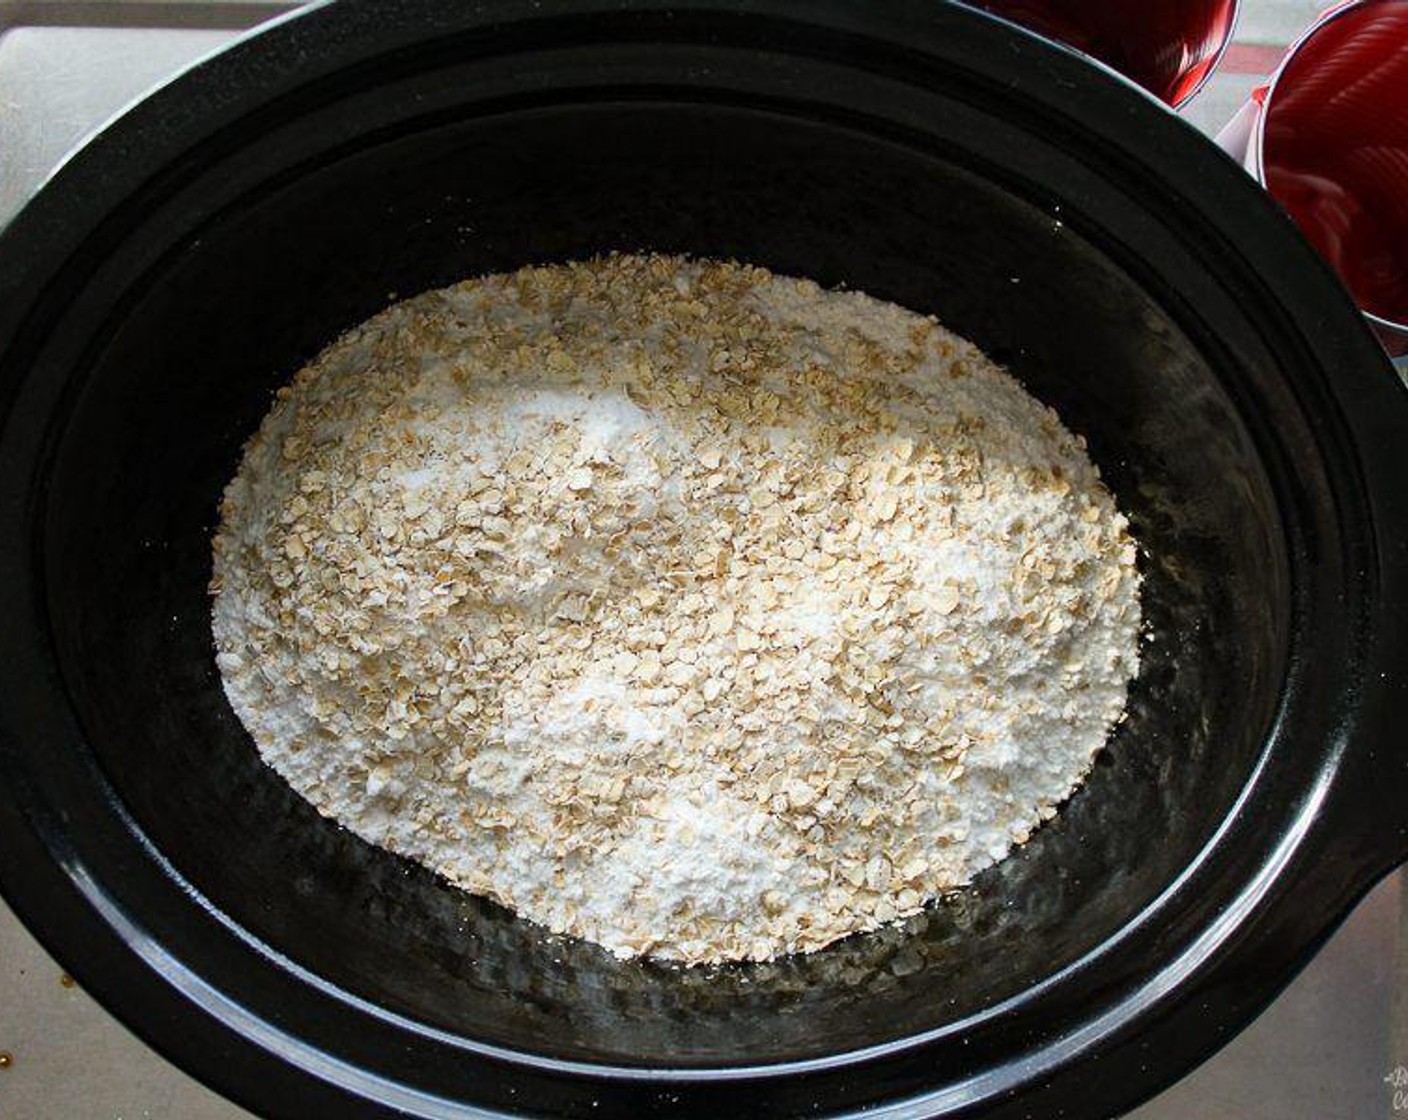 step 2 Pour the Cherry Pie Filling (4 1/3 cups) into the bottom of the slow cooker. Layer the Yellow Cake Mix (1 box) over the top. Sprinkle with the Oats (1/2 cup).